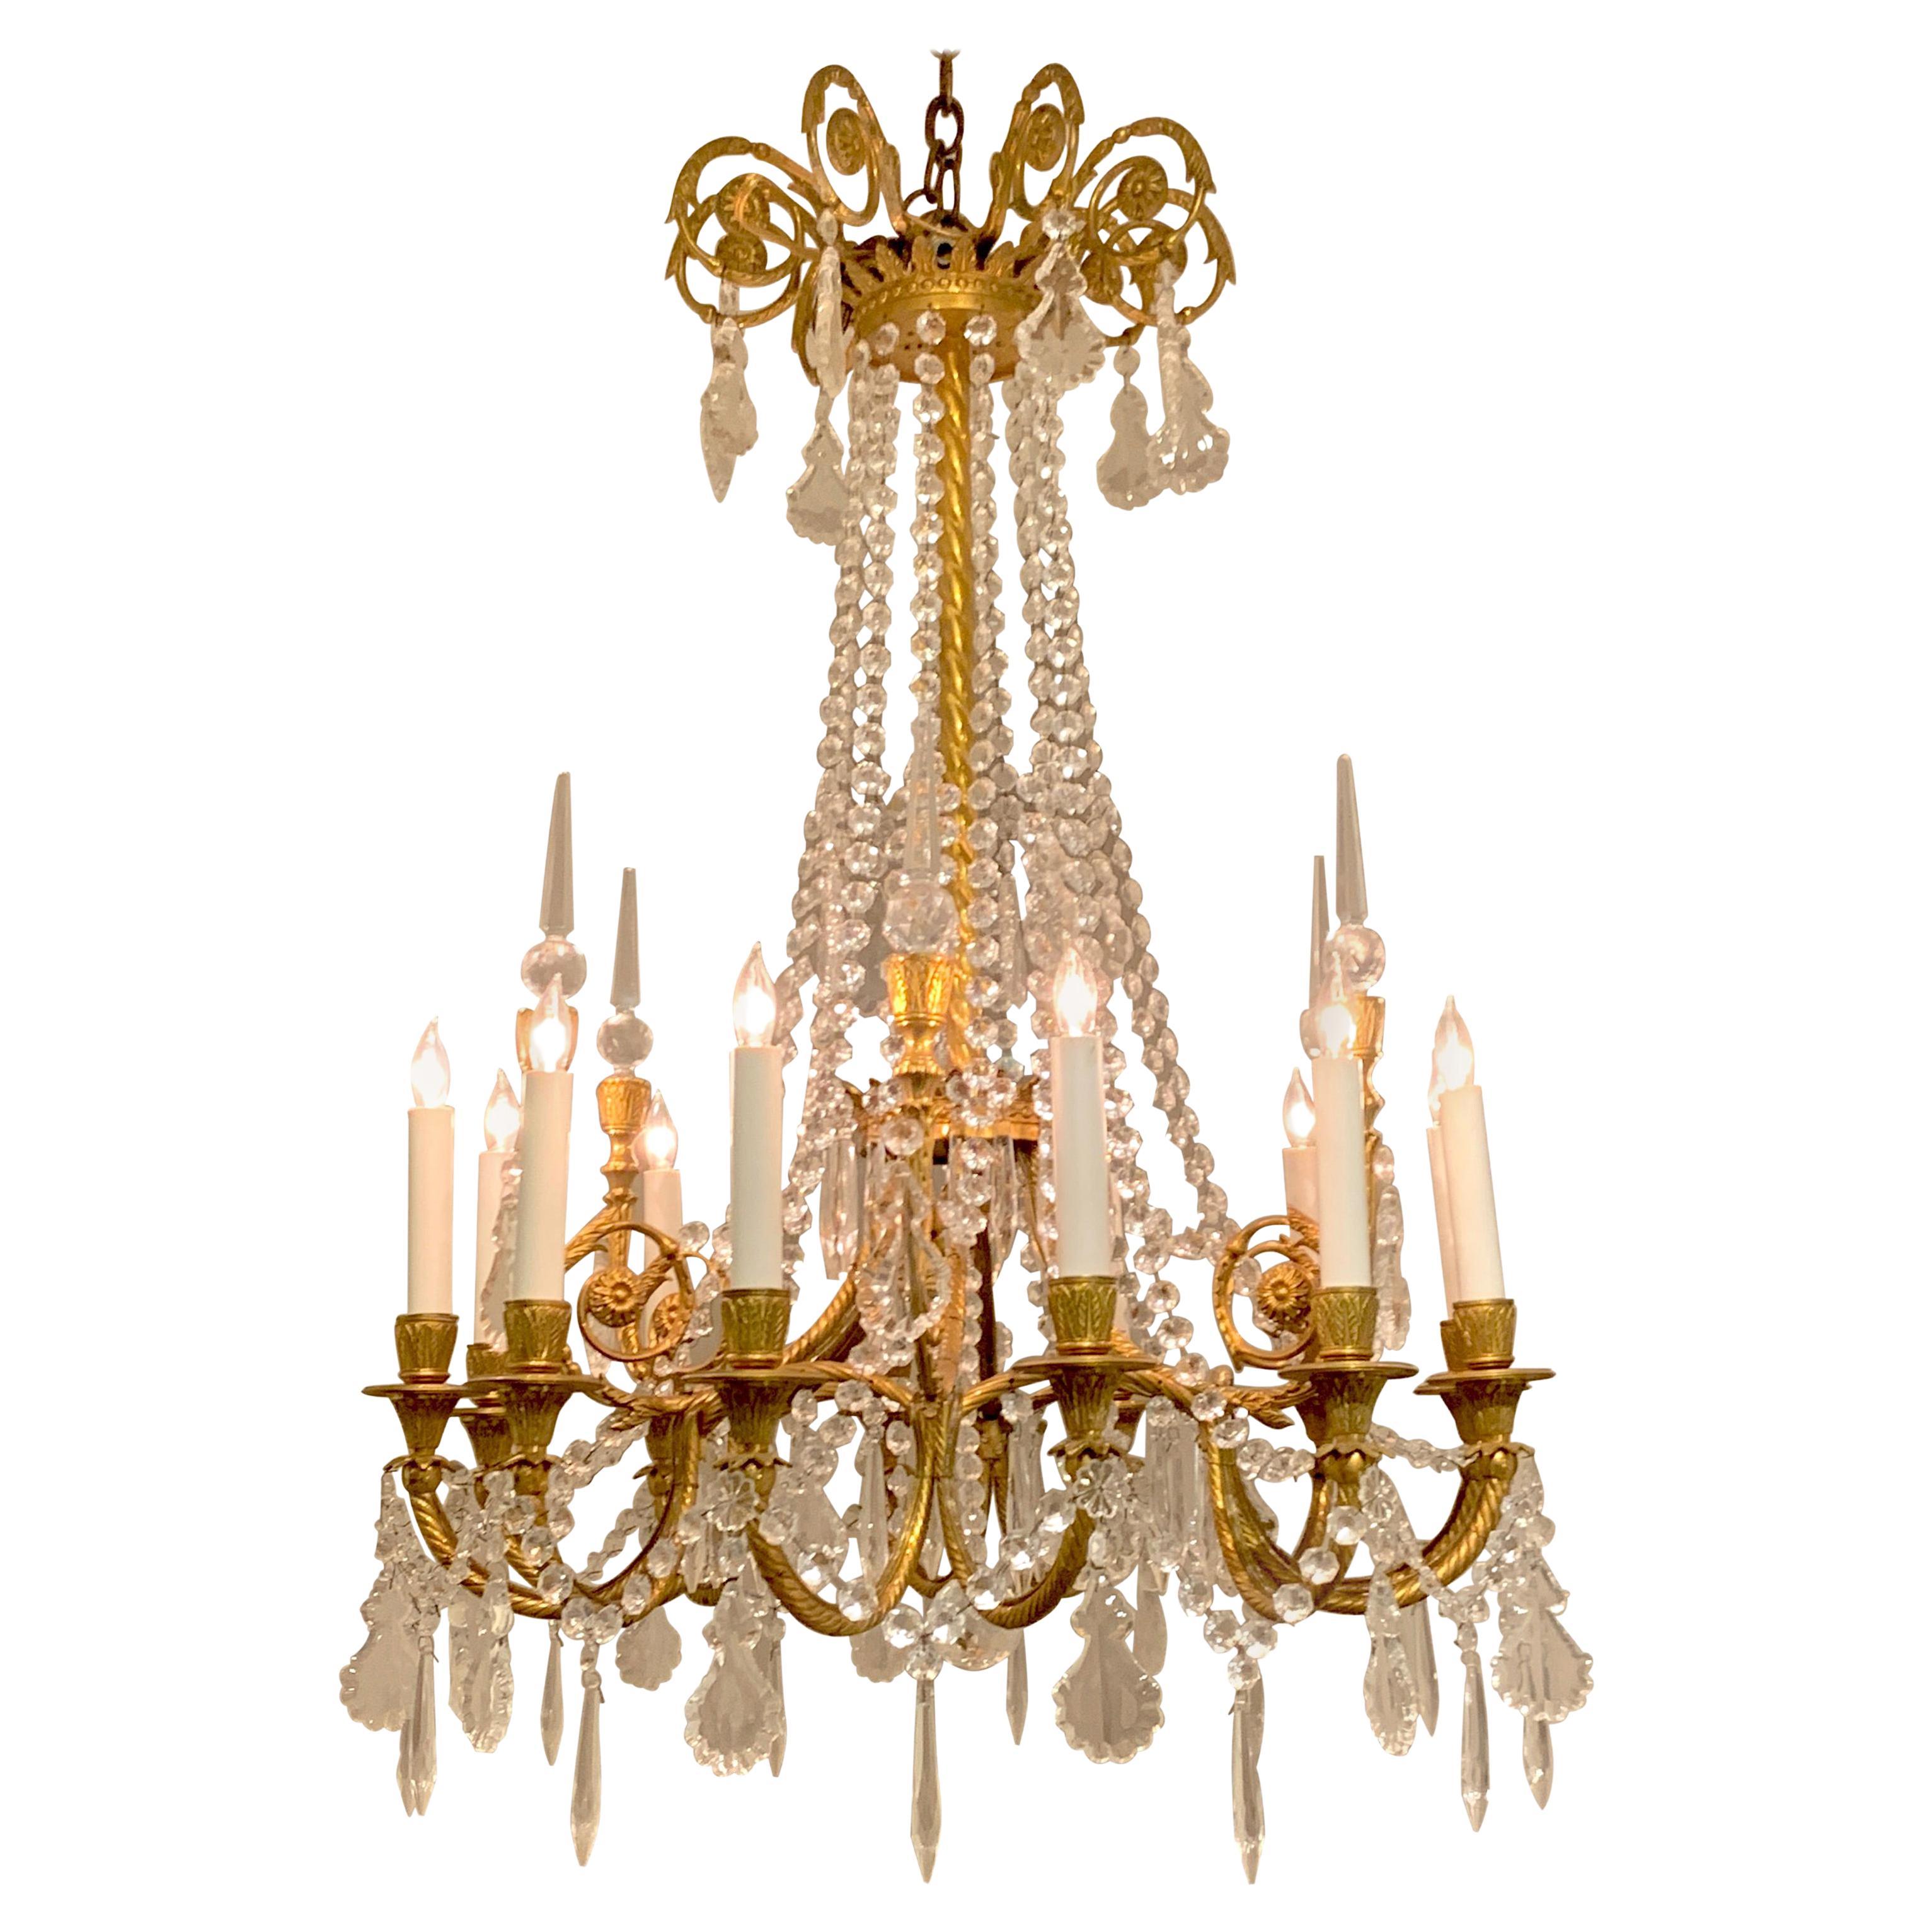 French Neoclassical Ormolu and Crystal 12-Light Chandelier, Paris, circa 1910